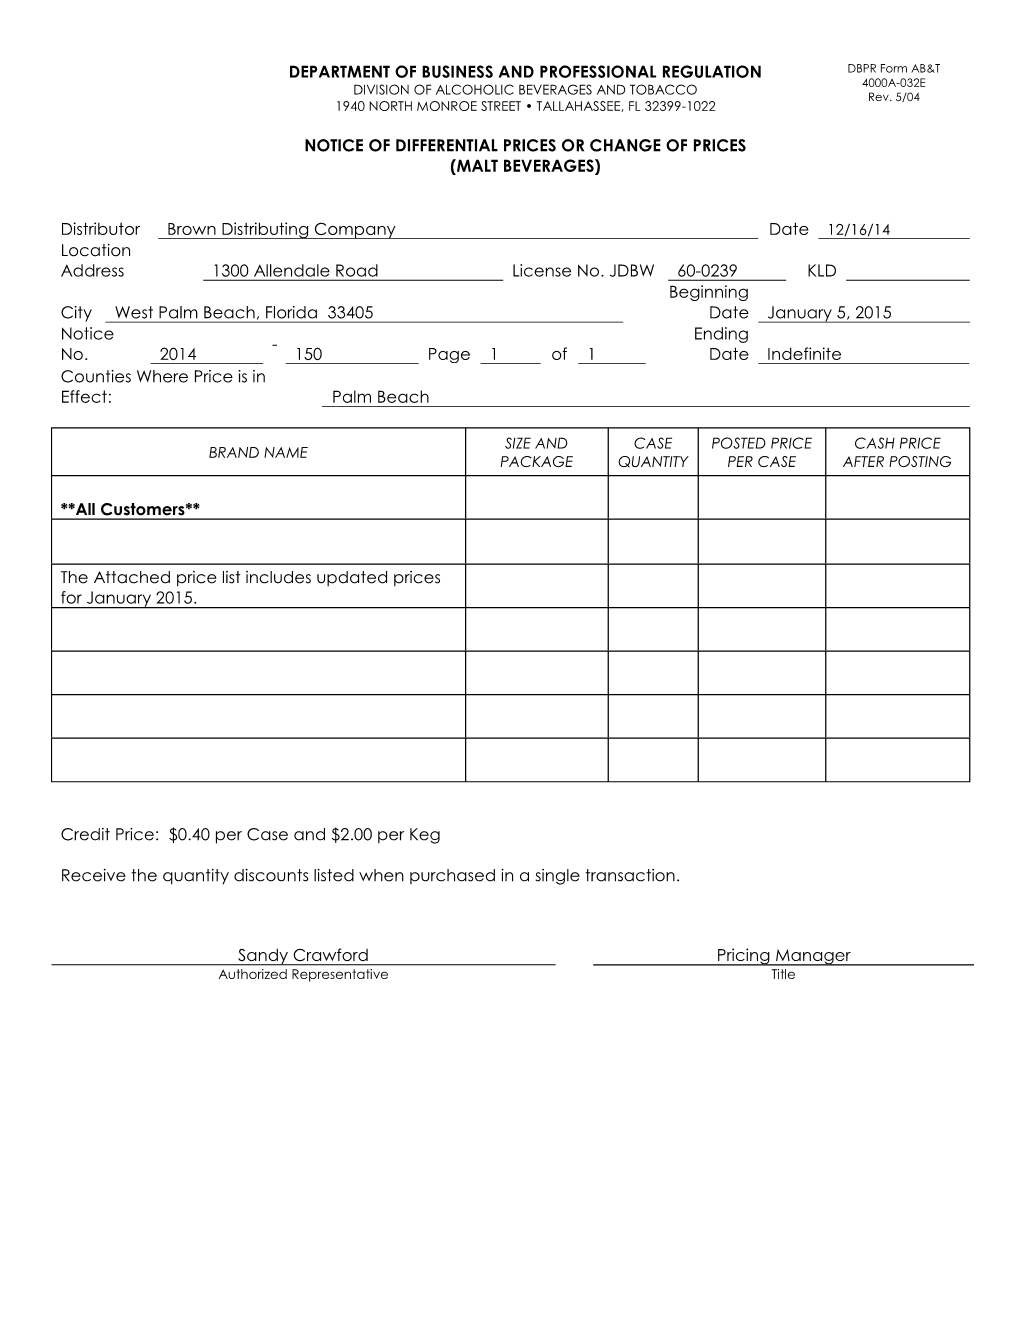 DEPARTMENT of BUSINESS and PROFESSIONAL REGULATION DBPR Form AB&T 4000A -032E DIVISION of ALCOHOLIC BEVERAGES and TOBACCO Rev